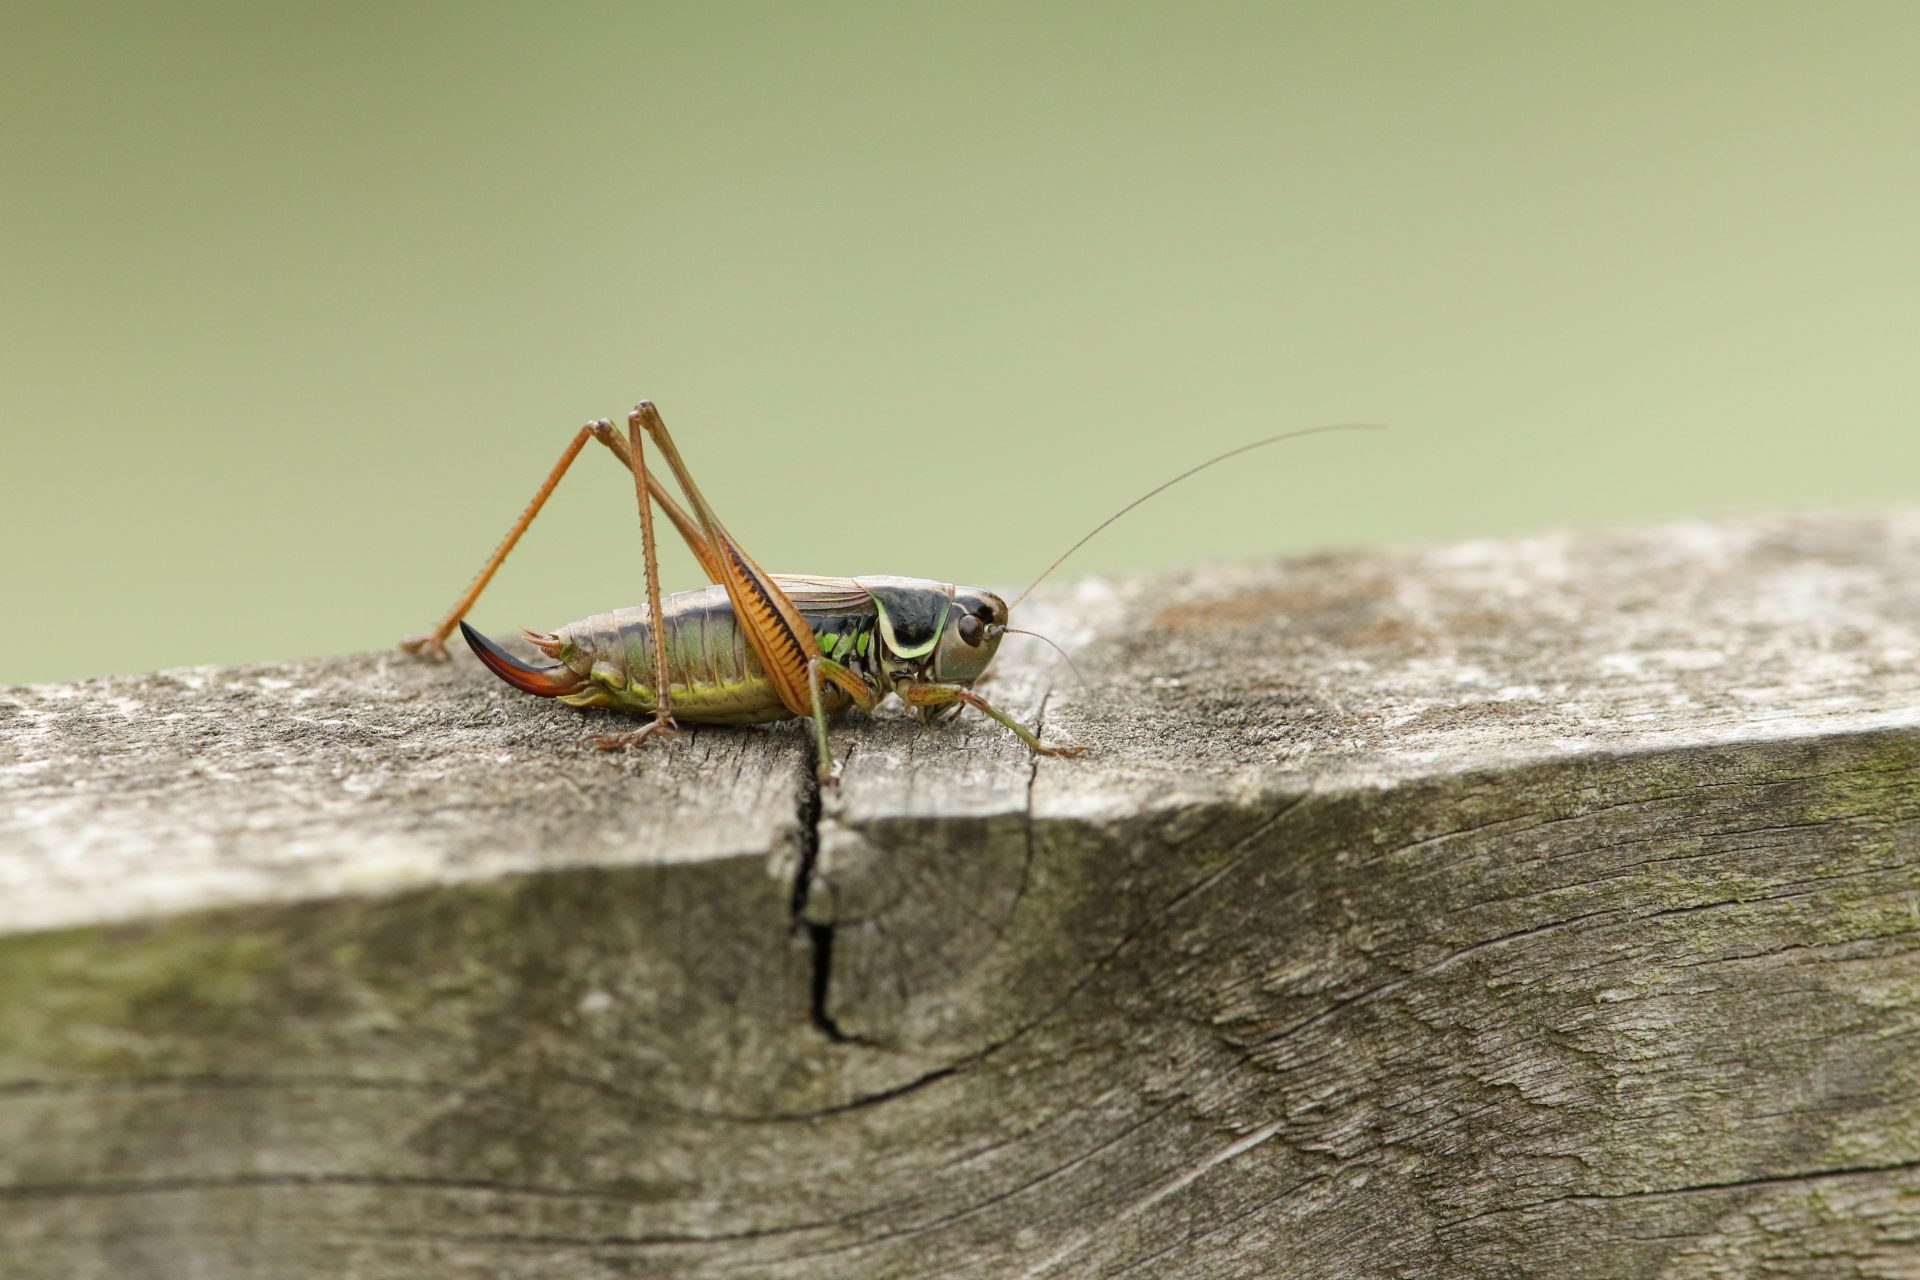 Crickets are ectotherms